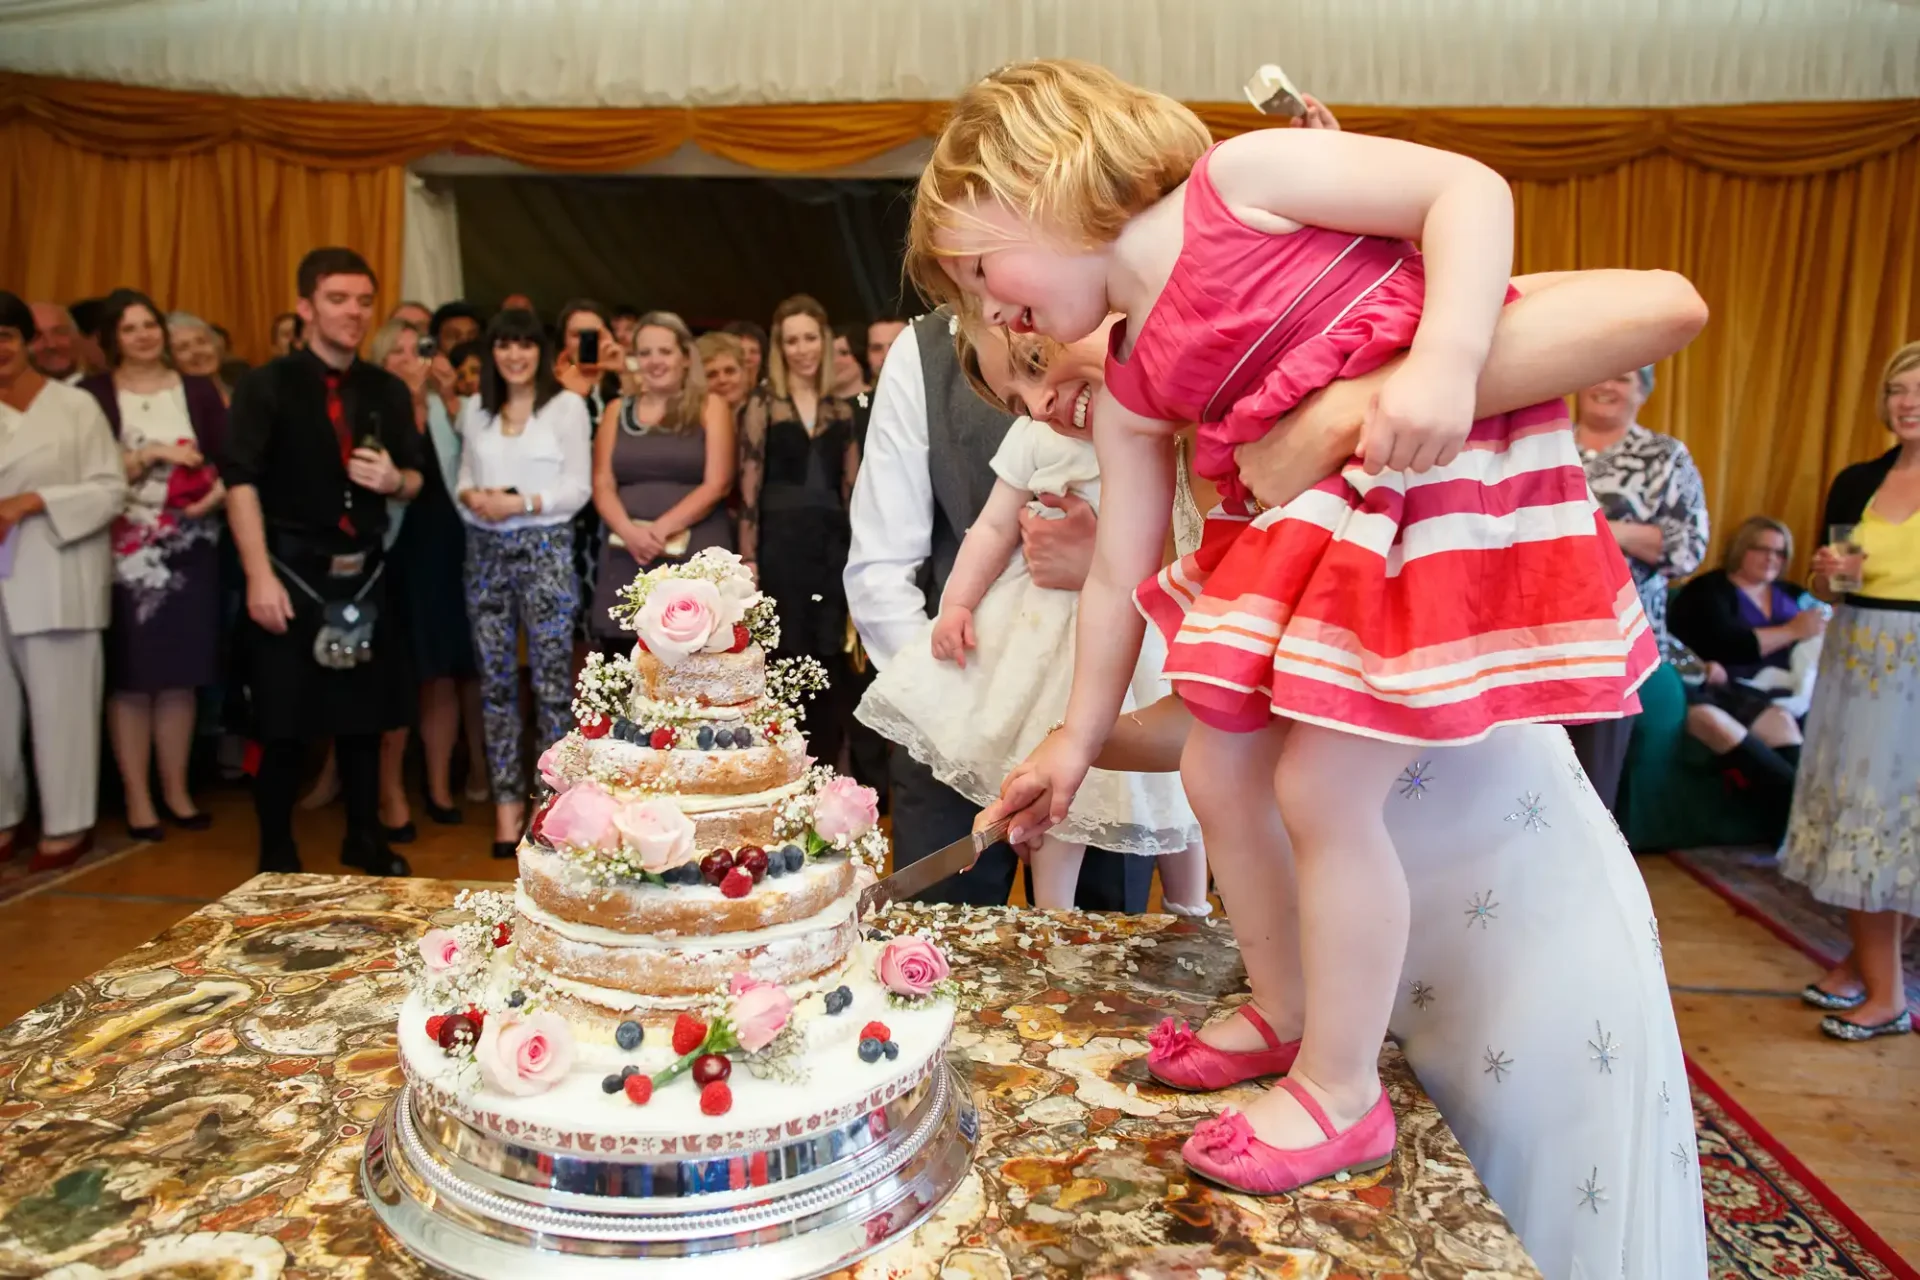 A young girl in a striped dress excitedly reaches for a tiered wedding cake at a reception, held by a smiling woman, with guests watching.